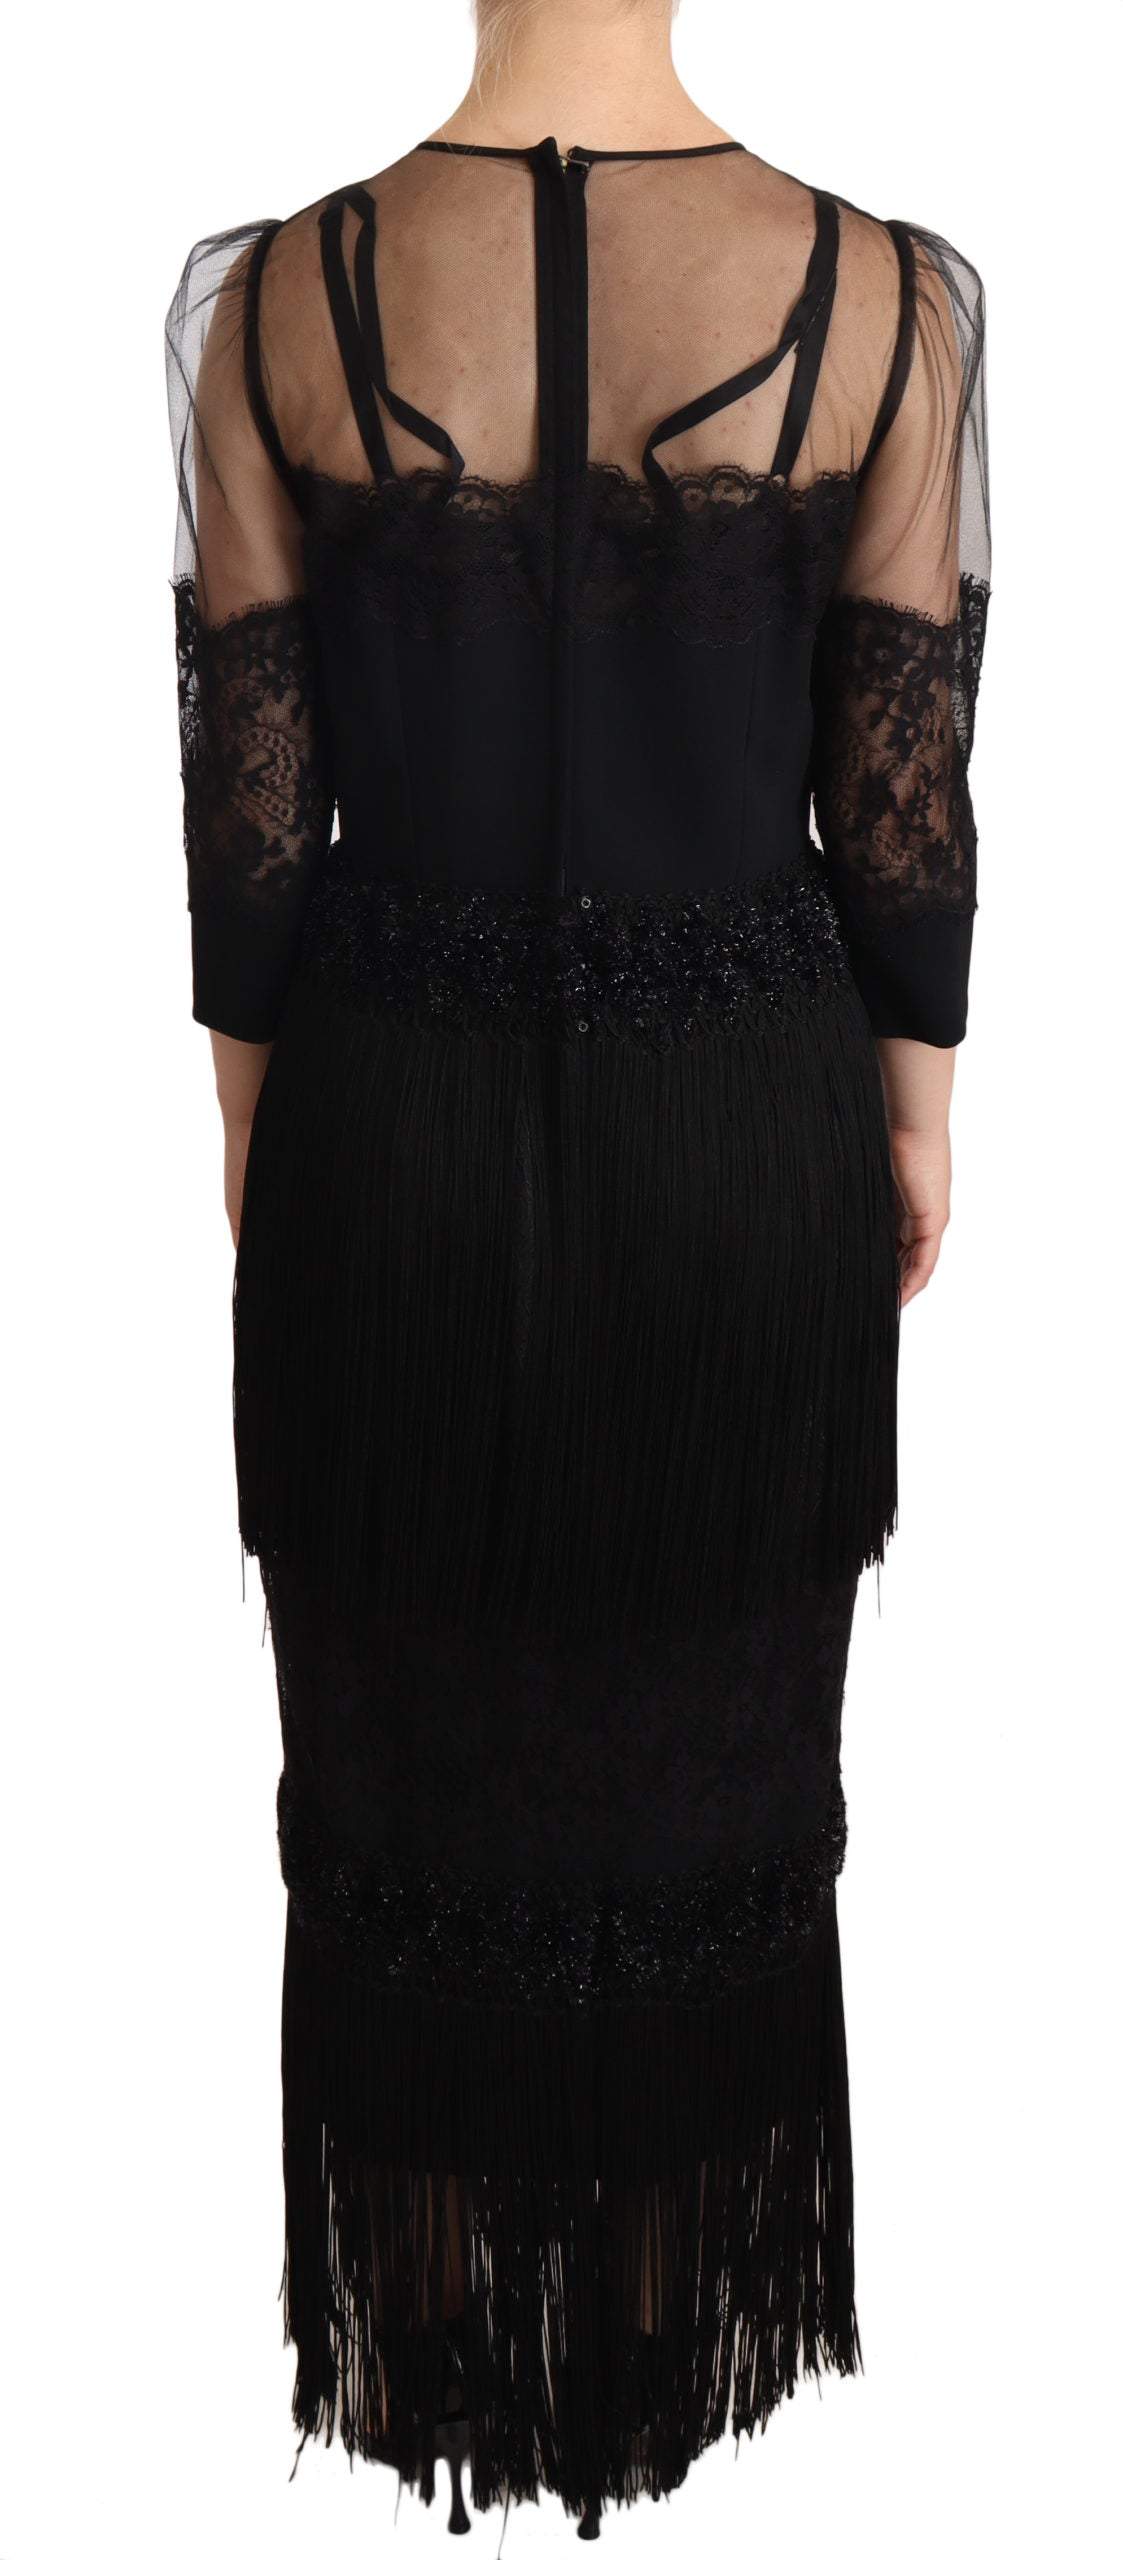 Dolce & Gabbana Black Sheer Floral Lace Crystal Maxi Dress Black, Dolce & Gabbana, Dresses - Women - Clothing, feed-agegroup-adult, feed-color-Black, feed-gender-female, IT44|L at SEYMAYKA